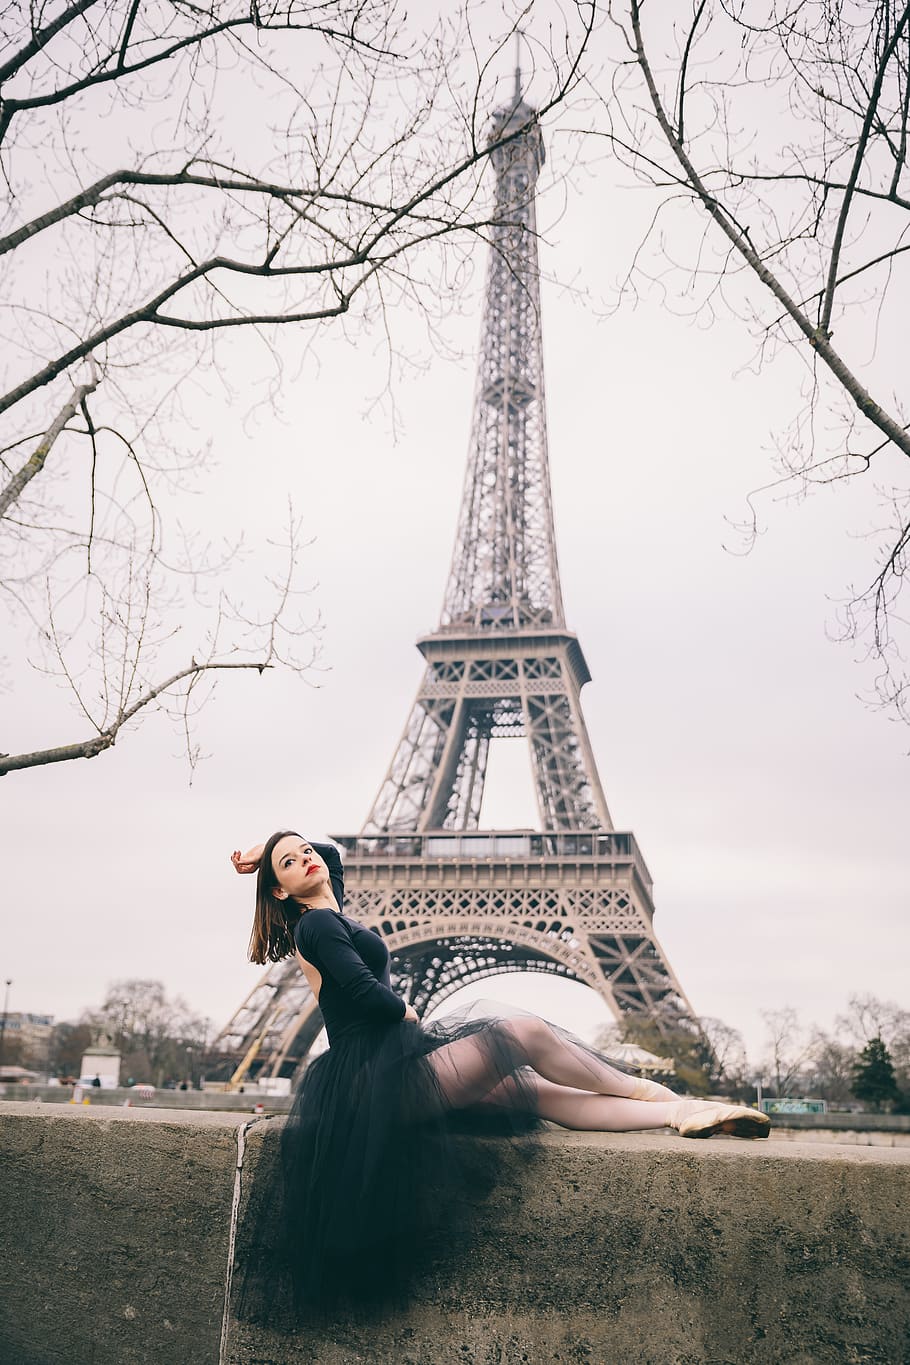 Photo of Posing Ballerina on Concrete Block With The Eiffel Tower in the Background, HD wallpaper